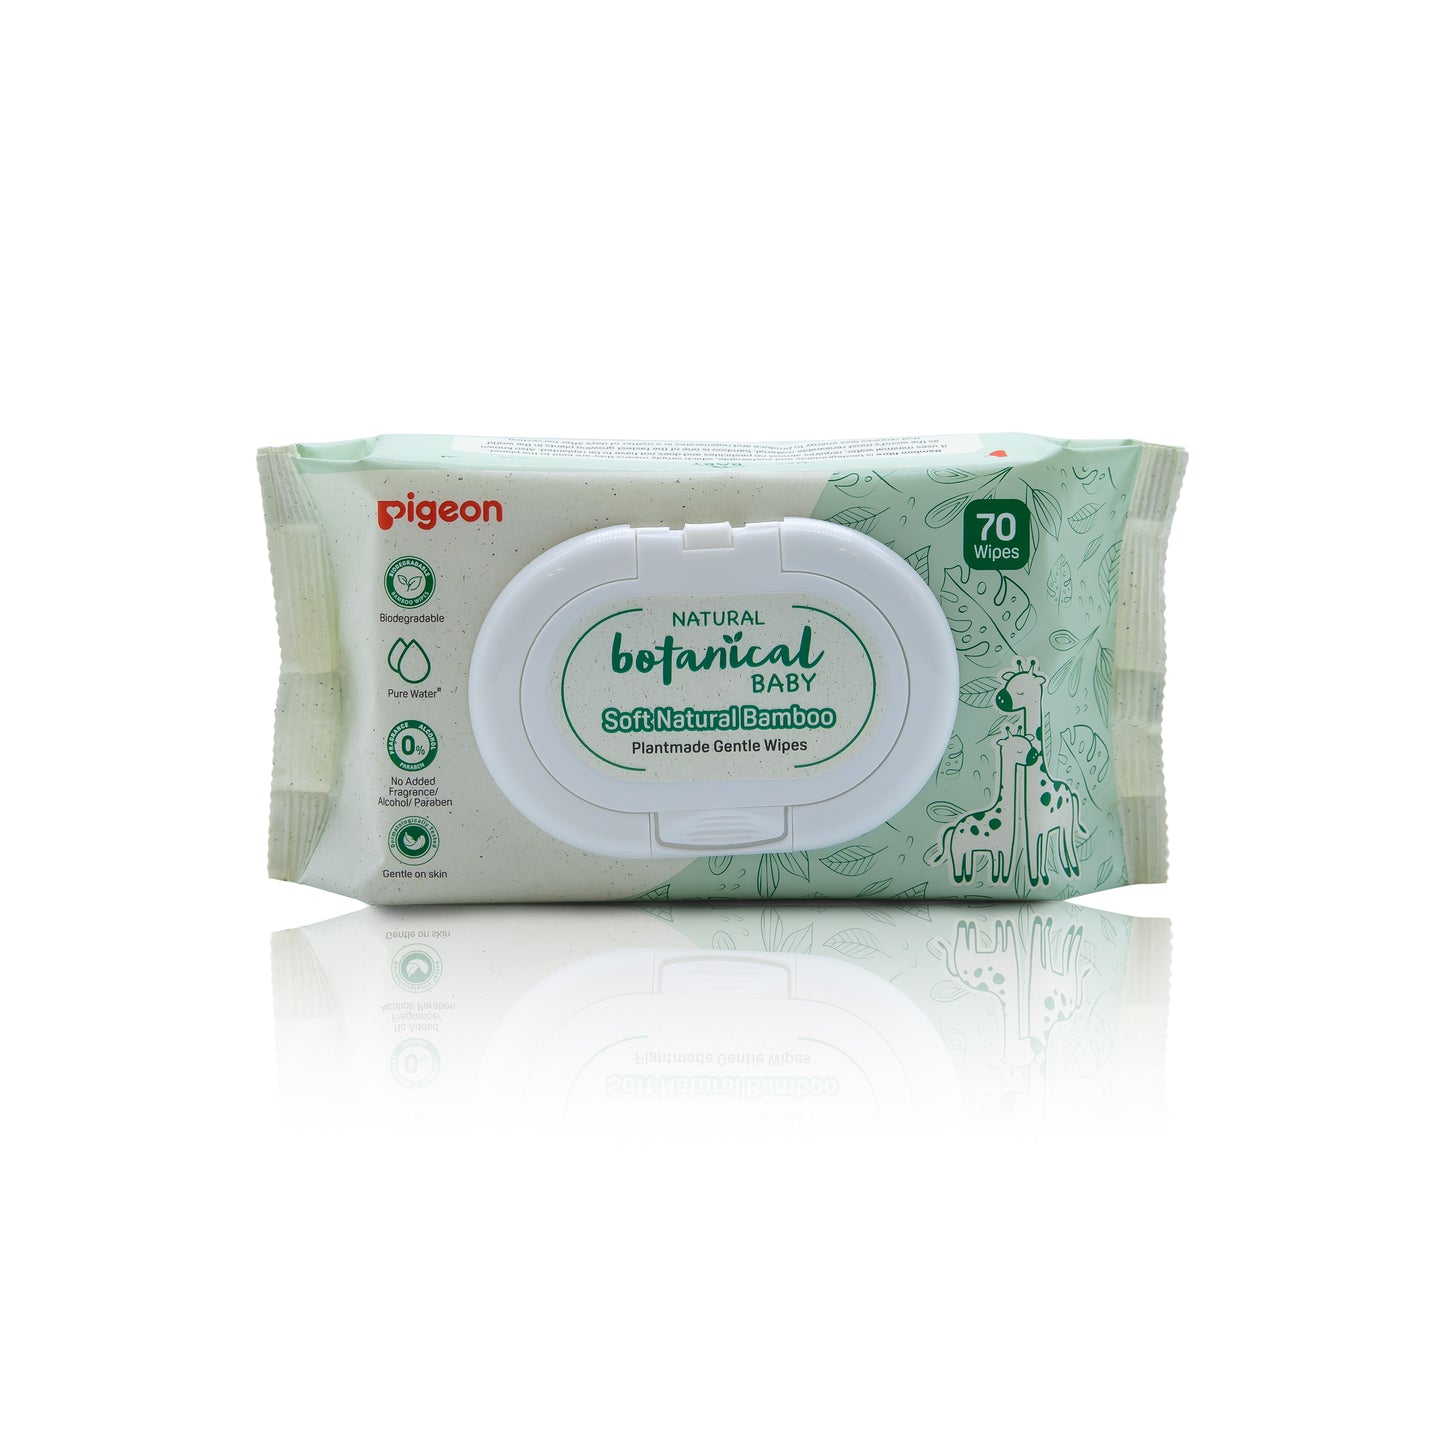 Pigeon Natural Botanical Baby Plantmade Gentle Wipes